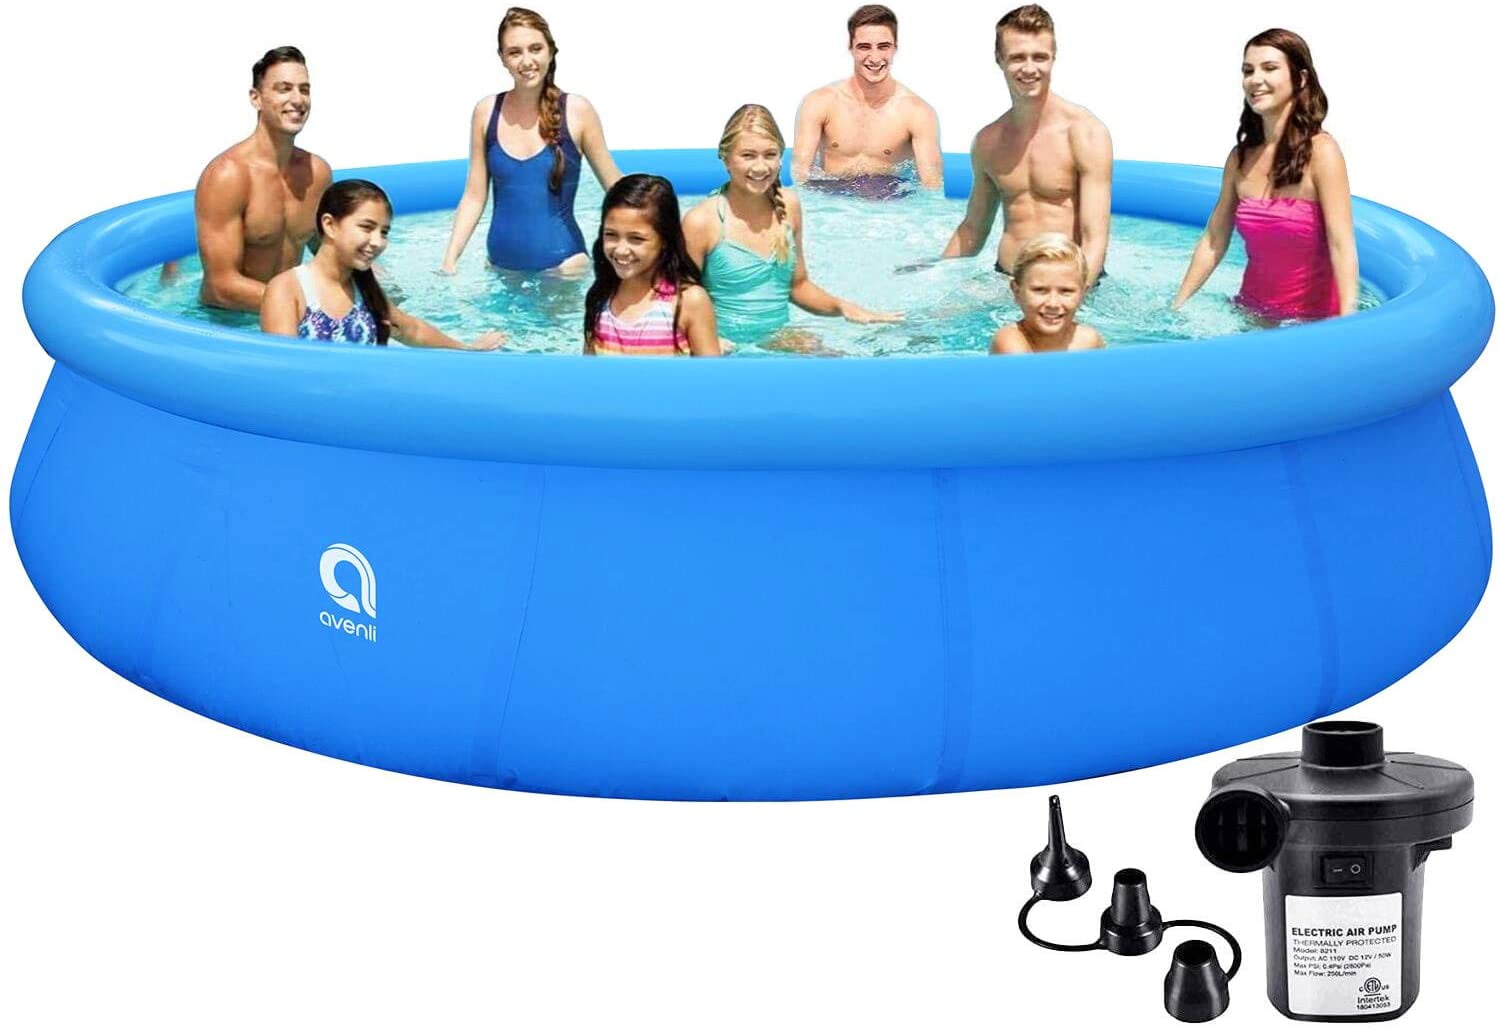 Inflatable Paddling Pool Swim Centre Family Lounge Pool Anti-Exposure Anti-Crack Round Family Water Park Pool Water Fun Beach Party Portable Swimming Pool for Children Adults